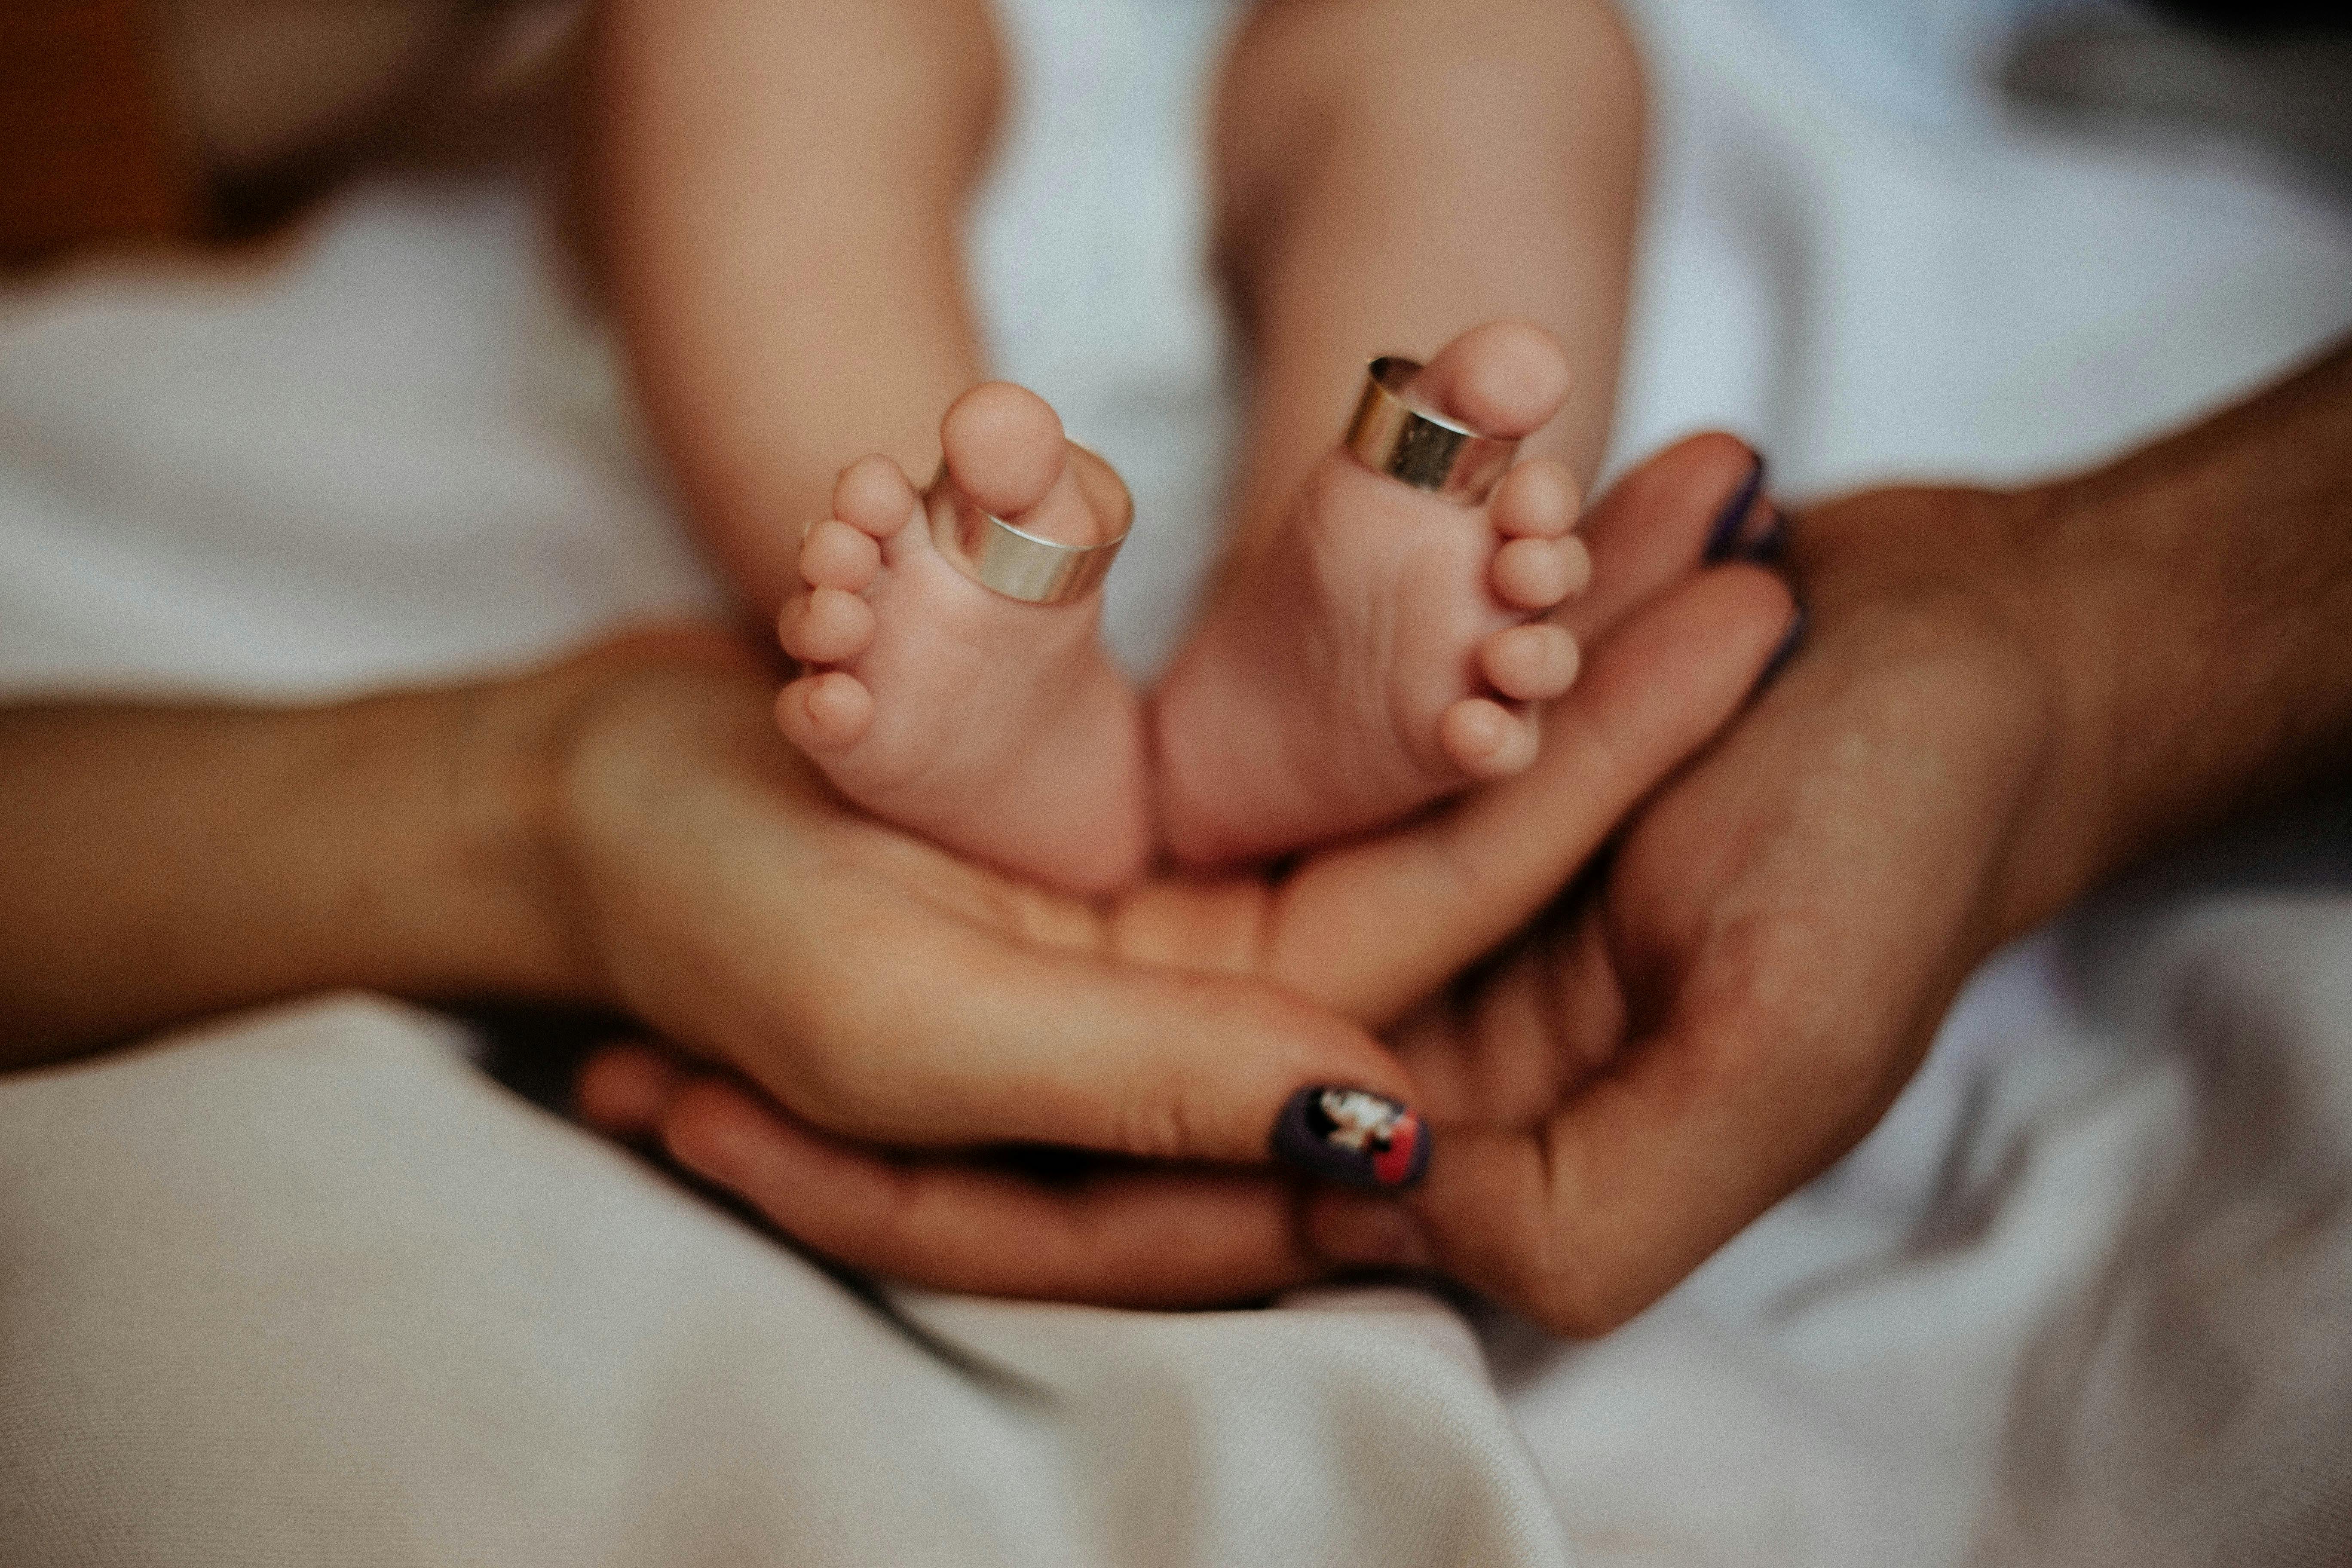 Mom And Dad Hands Holding A Newborn Baby With Wedding Rings On The Feet Of  The Child. Stock Photo, Picture and Royalty Free Image. Image 114868790.